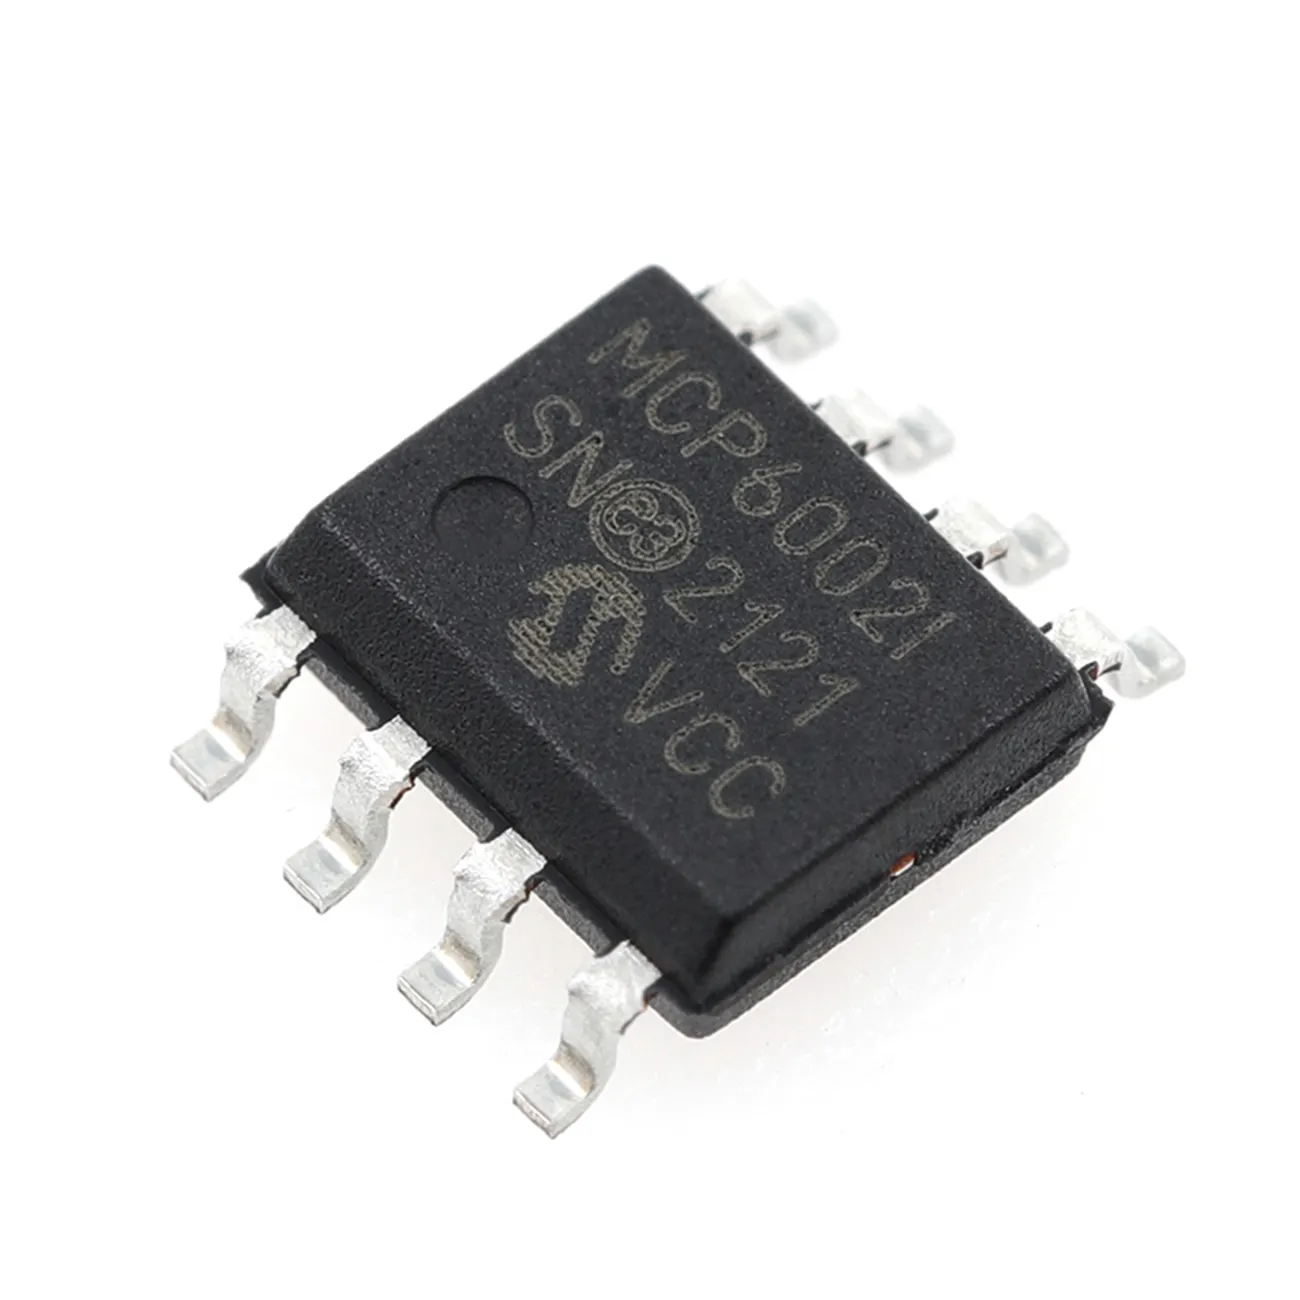 Xinghongye MCP6002T-I/SN Integrated Circuit IC Chip Electronic Components